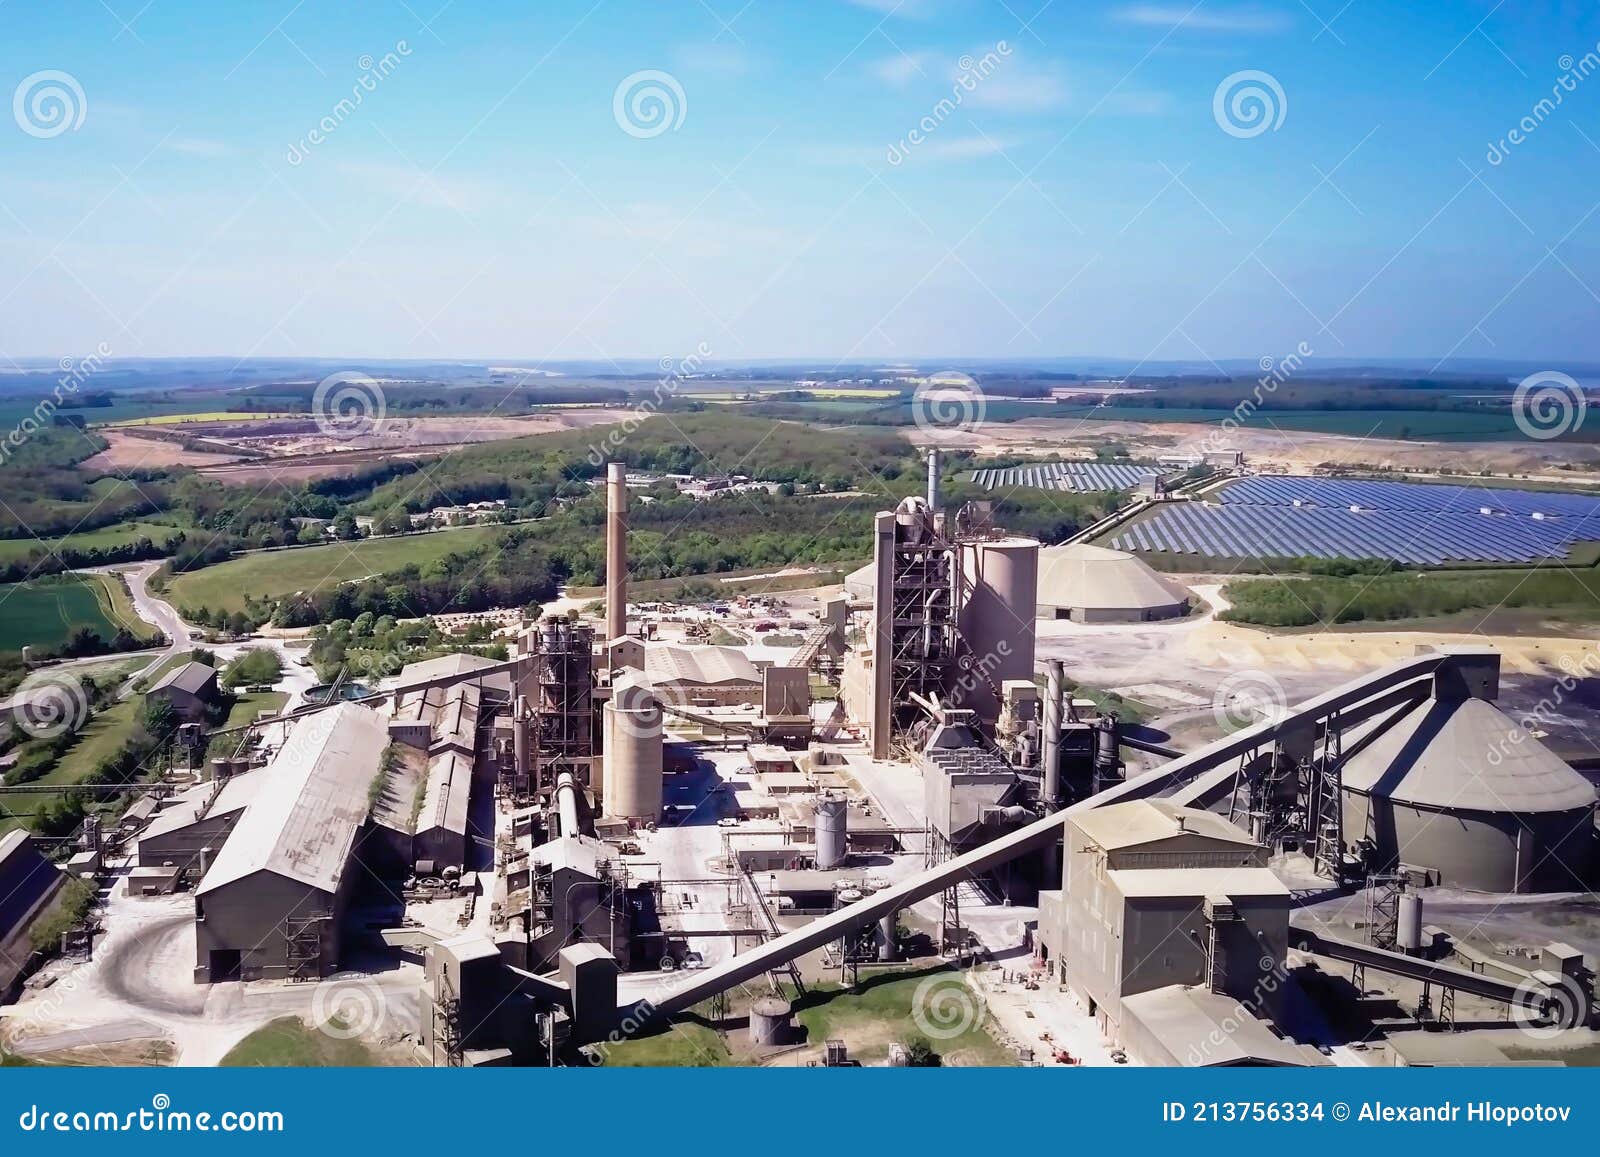 large cement plant. the production of cement on an industrial scale in the factory